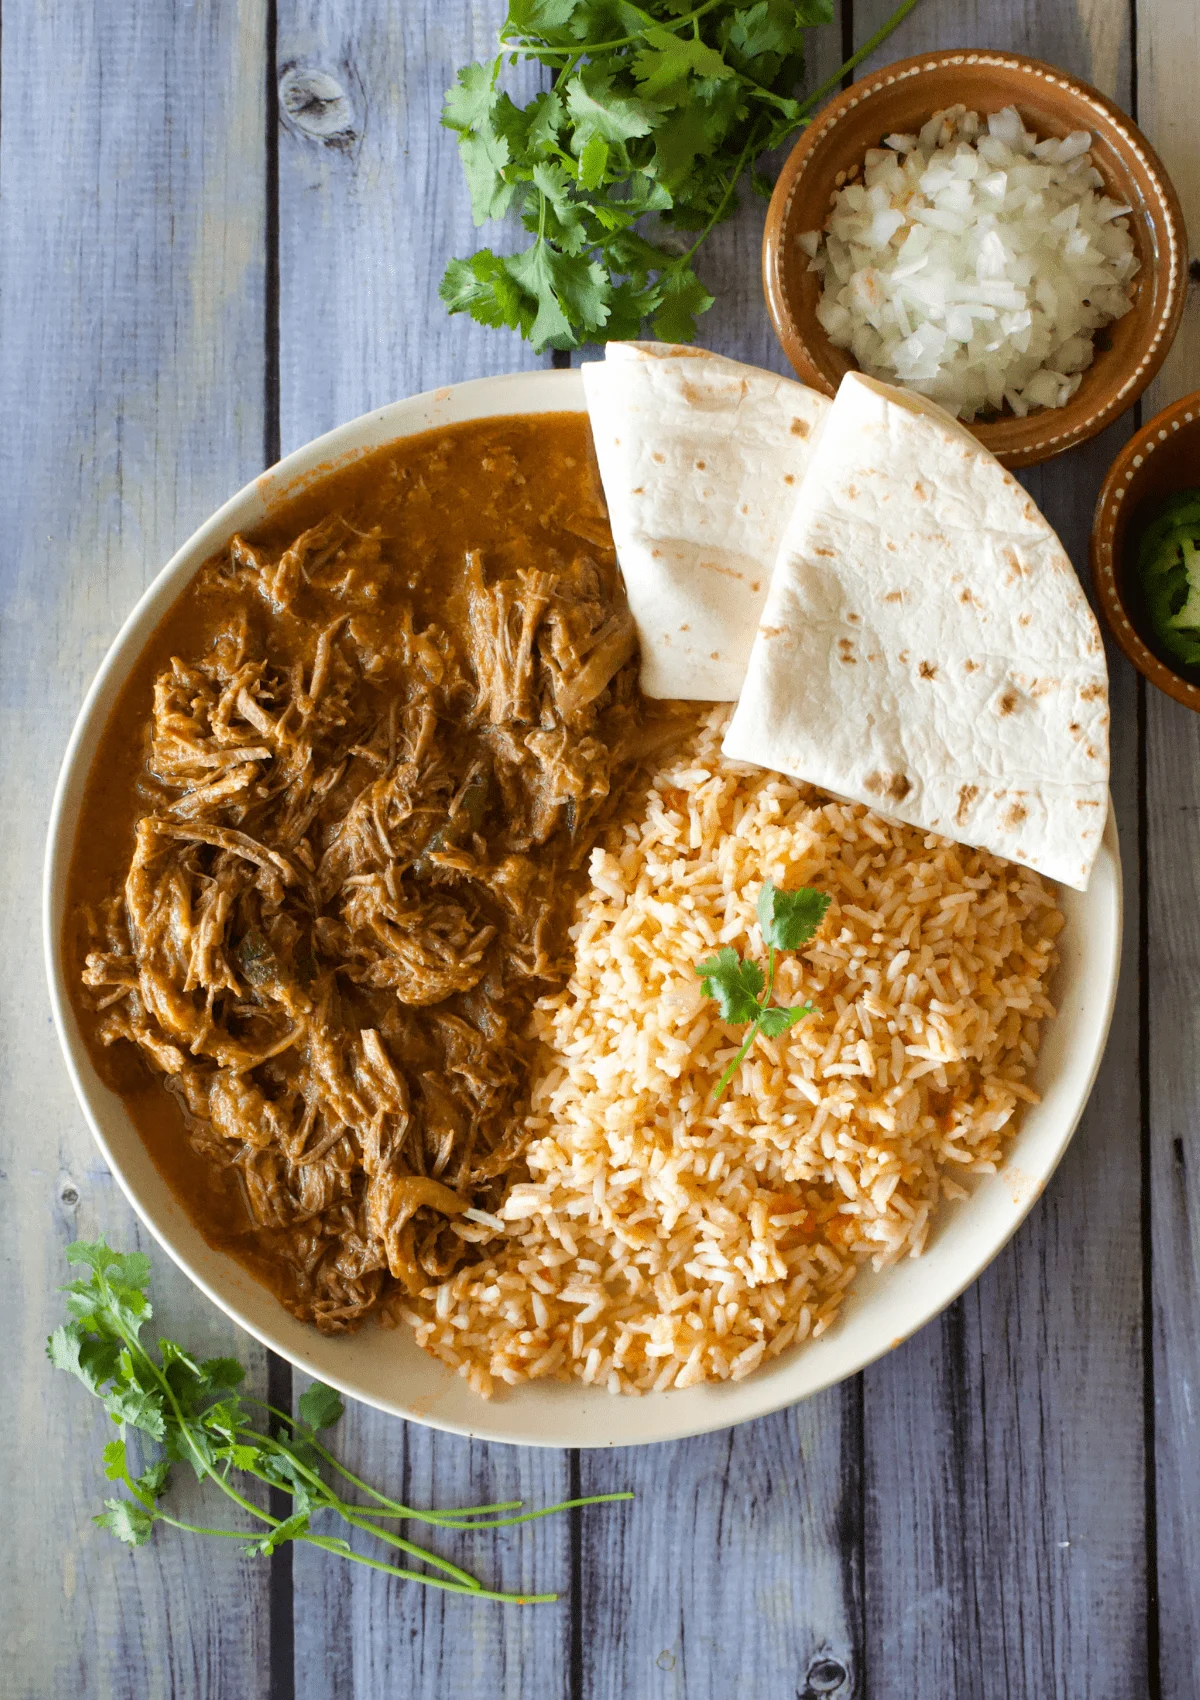 Carne deshebrada served with rice and tortillas.